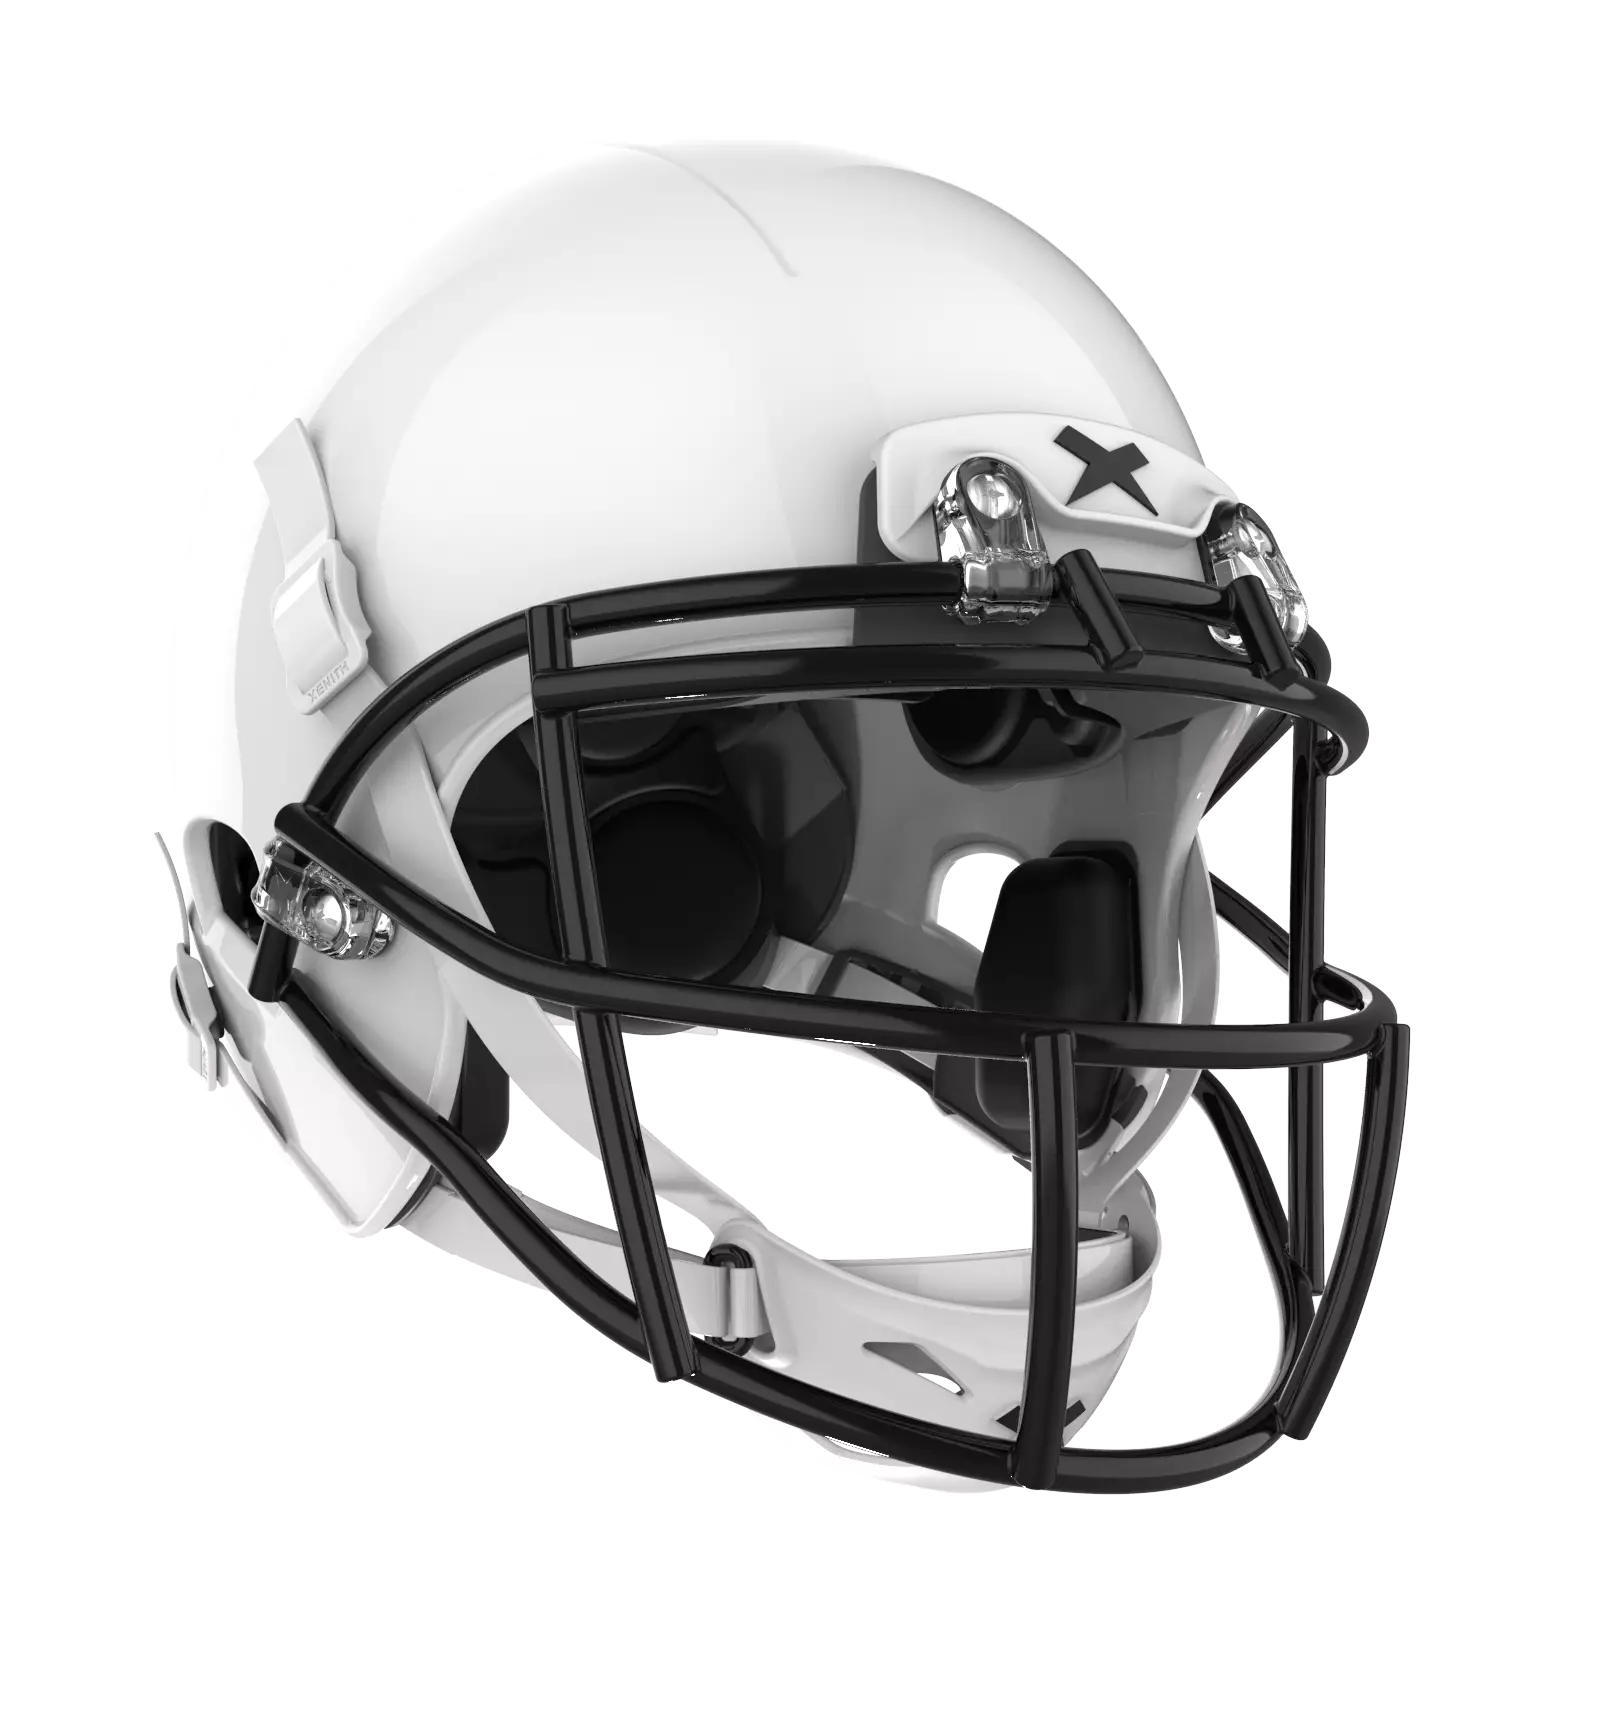 Right facing view x2e+ white shell, black facemask.